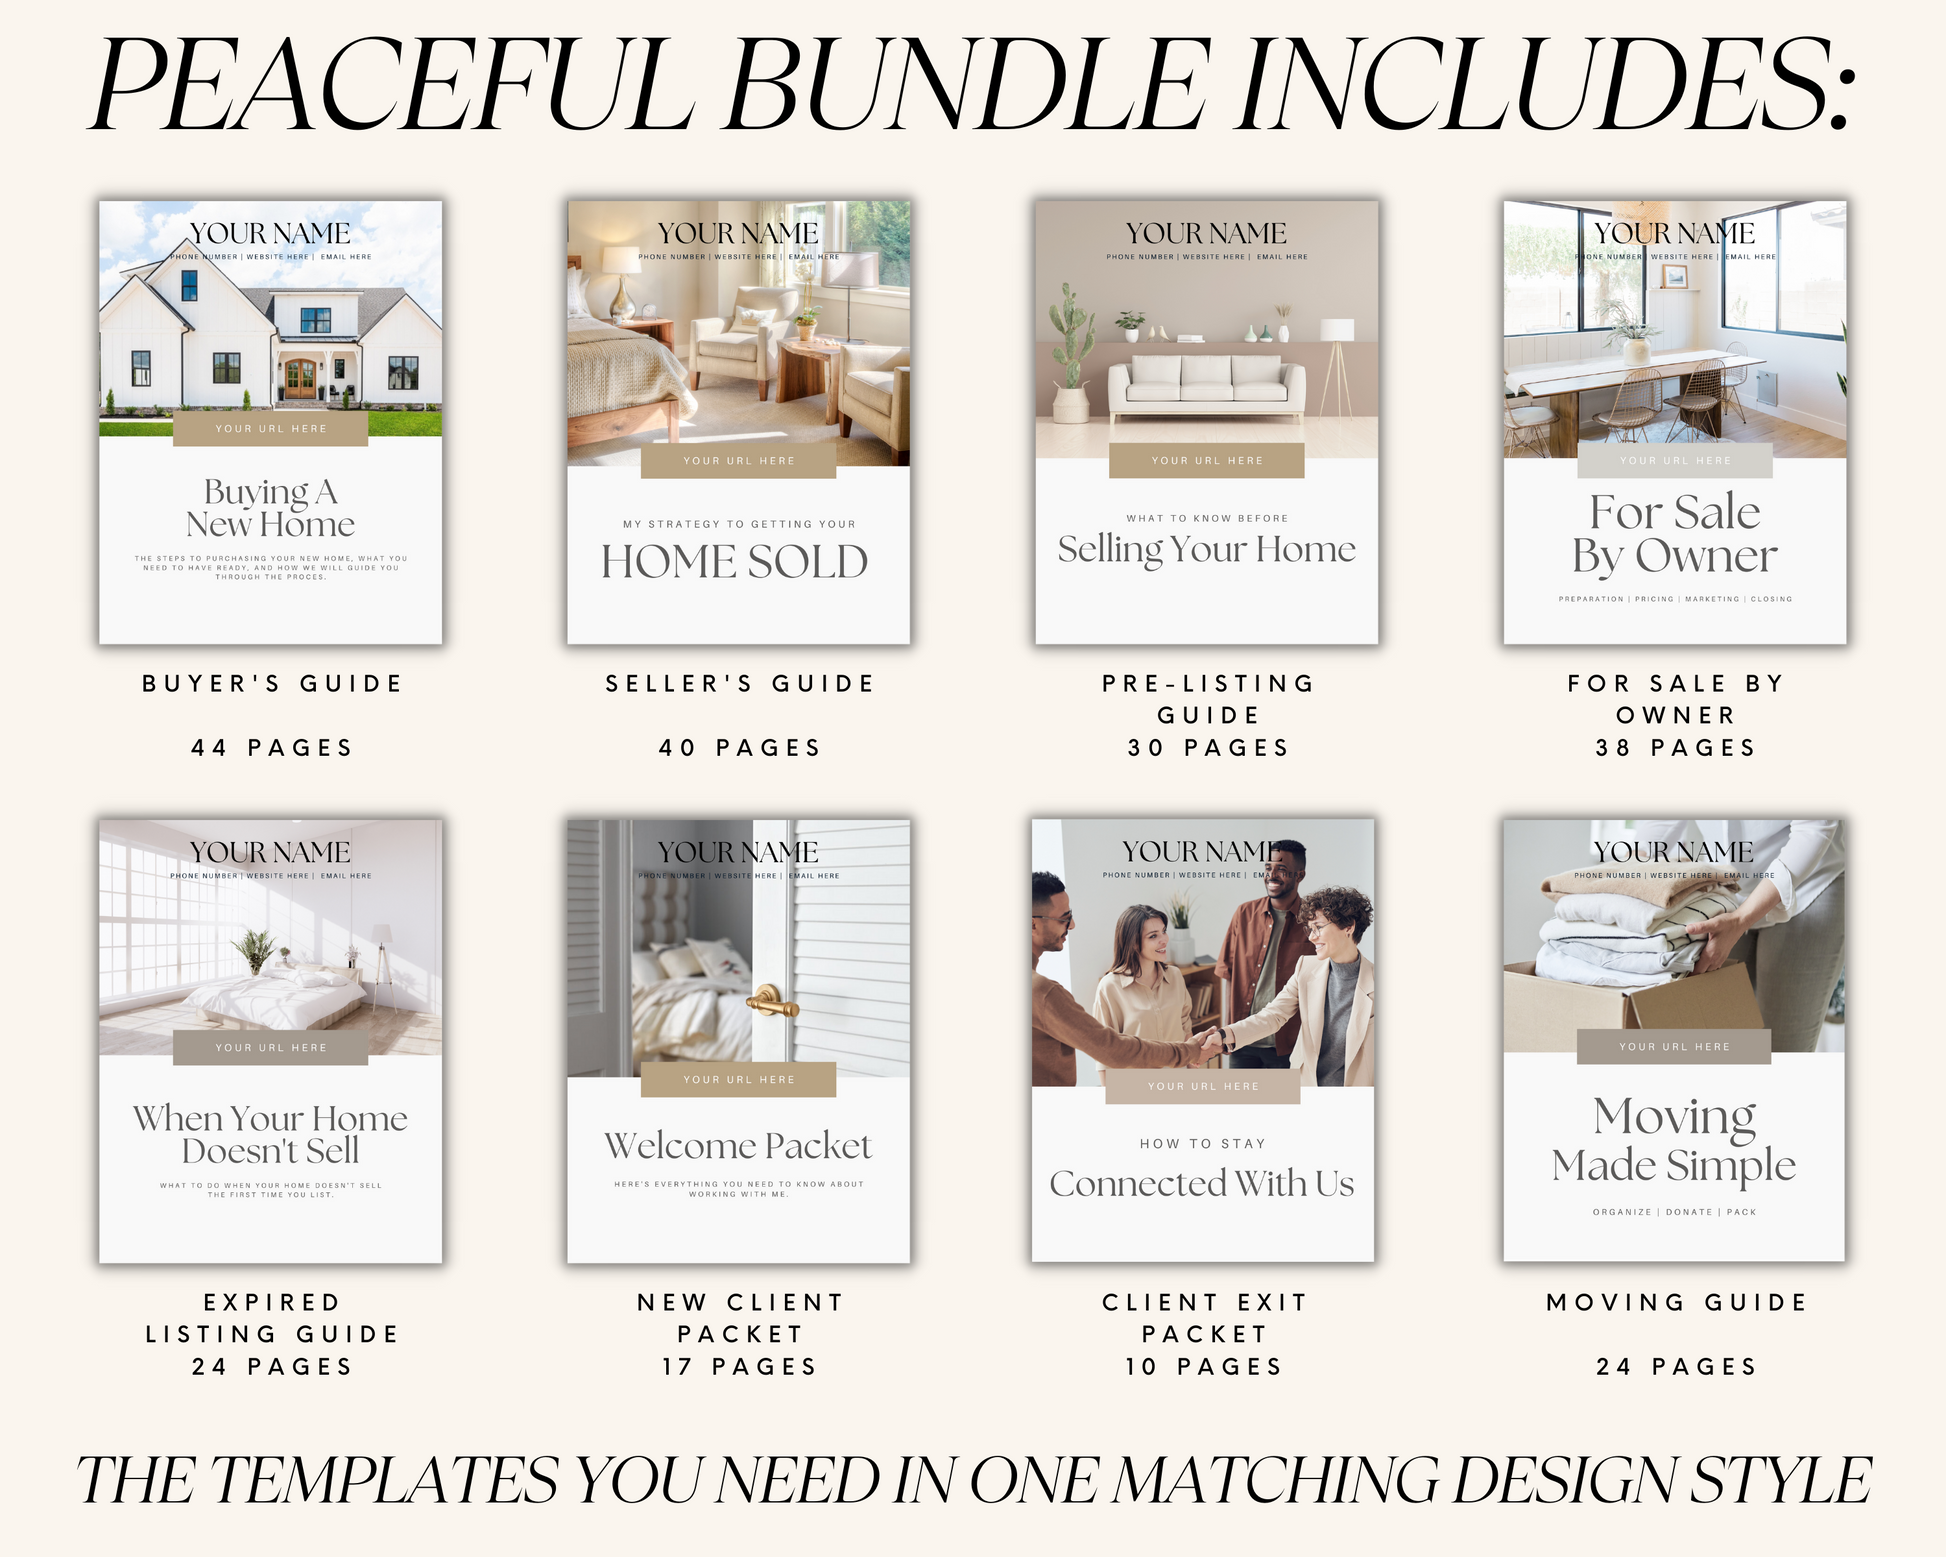 high end listing,luxury listing,luxury real estate,luxury realtor,luxury templates,real estate agent,real estate brand,real estate bundle,realtor branding,realtor bundle,realtor instagram,realtor marketing,realtor template